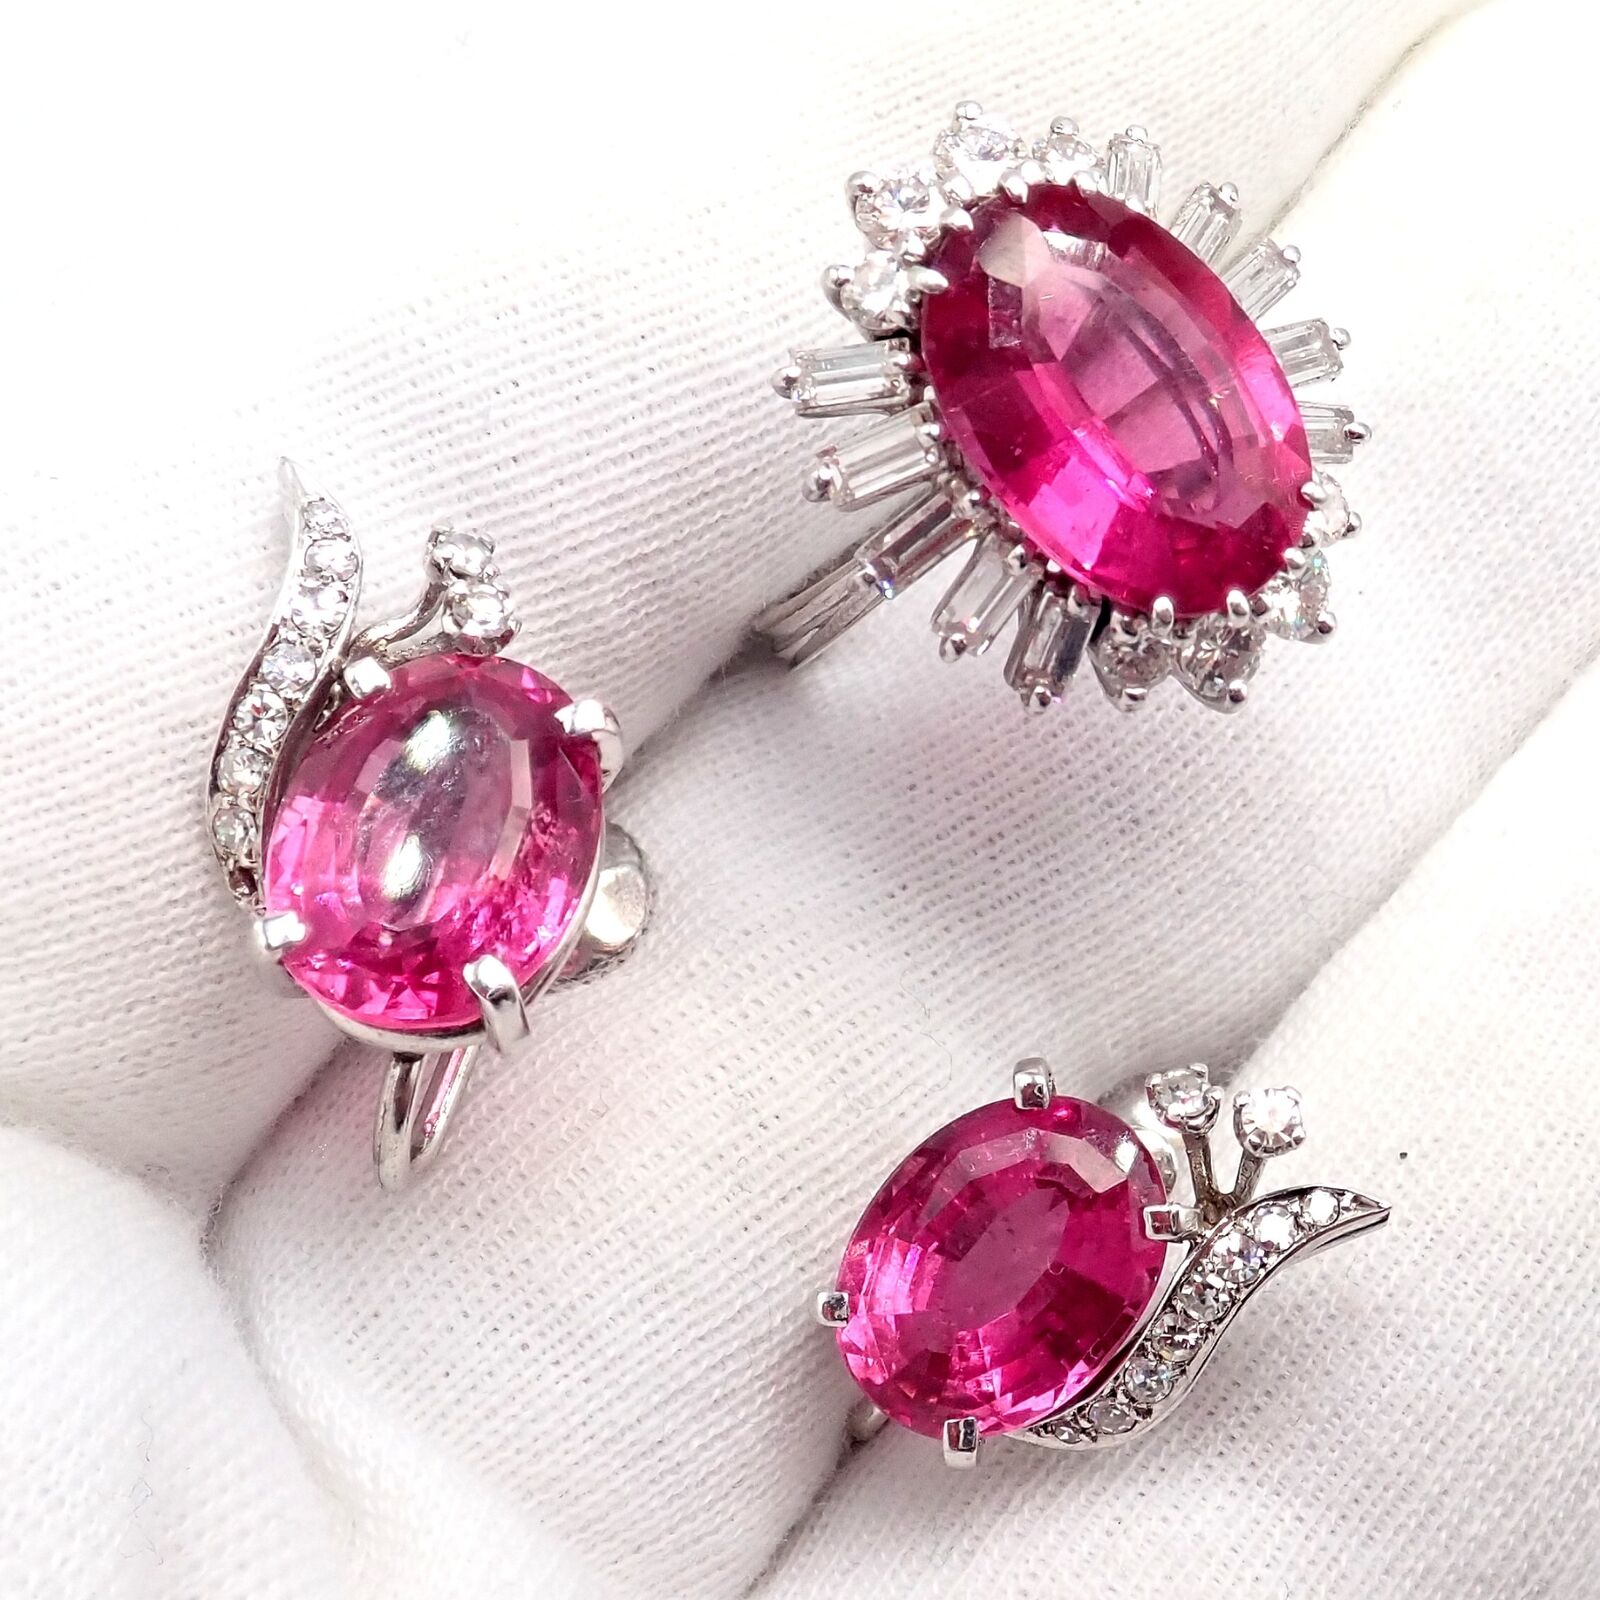 H. Stern Jewelry & Watches:Fine Jewelry:Jewelry Sets Authentic! H. Stern 18k White Gold Diamond Pink Tourmaline Ring + Earrings Set